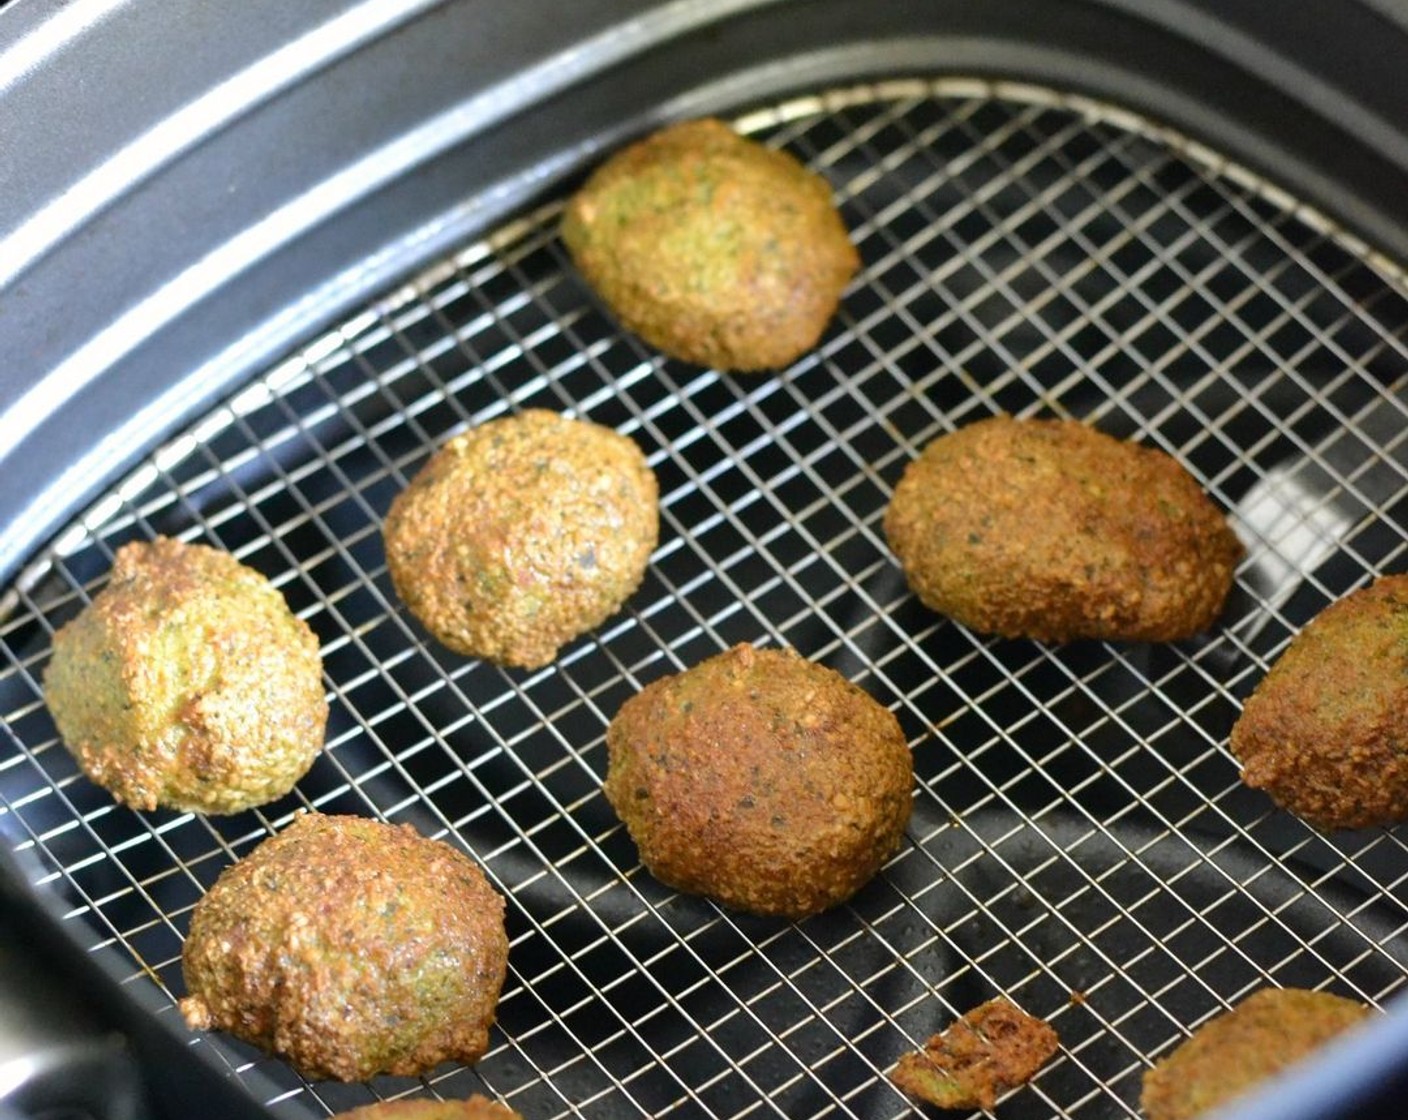 step 5 Spray the falafel balls with oil and then raise the heat to 355 degrees F (180 degrees C). Bake for another 5-10 minutes or until they turn a nice golden brown.